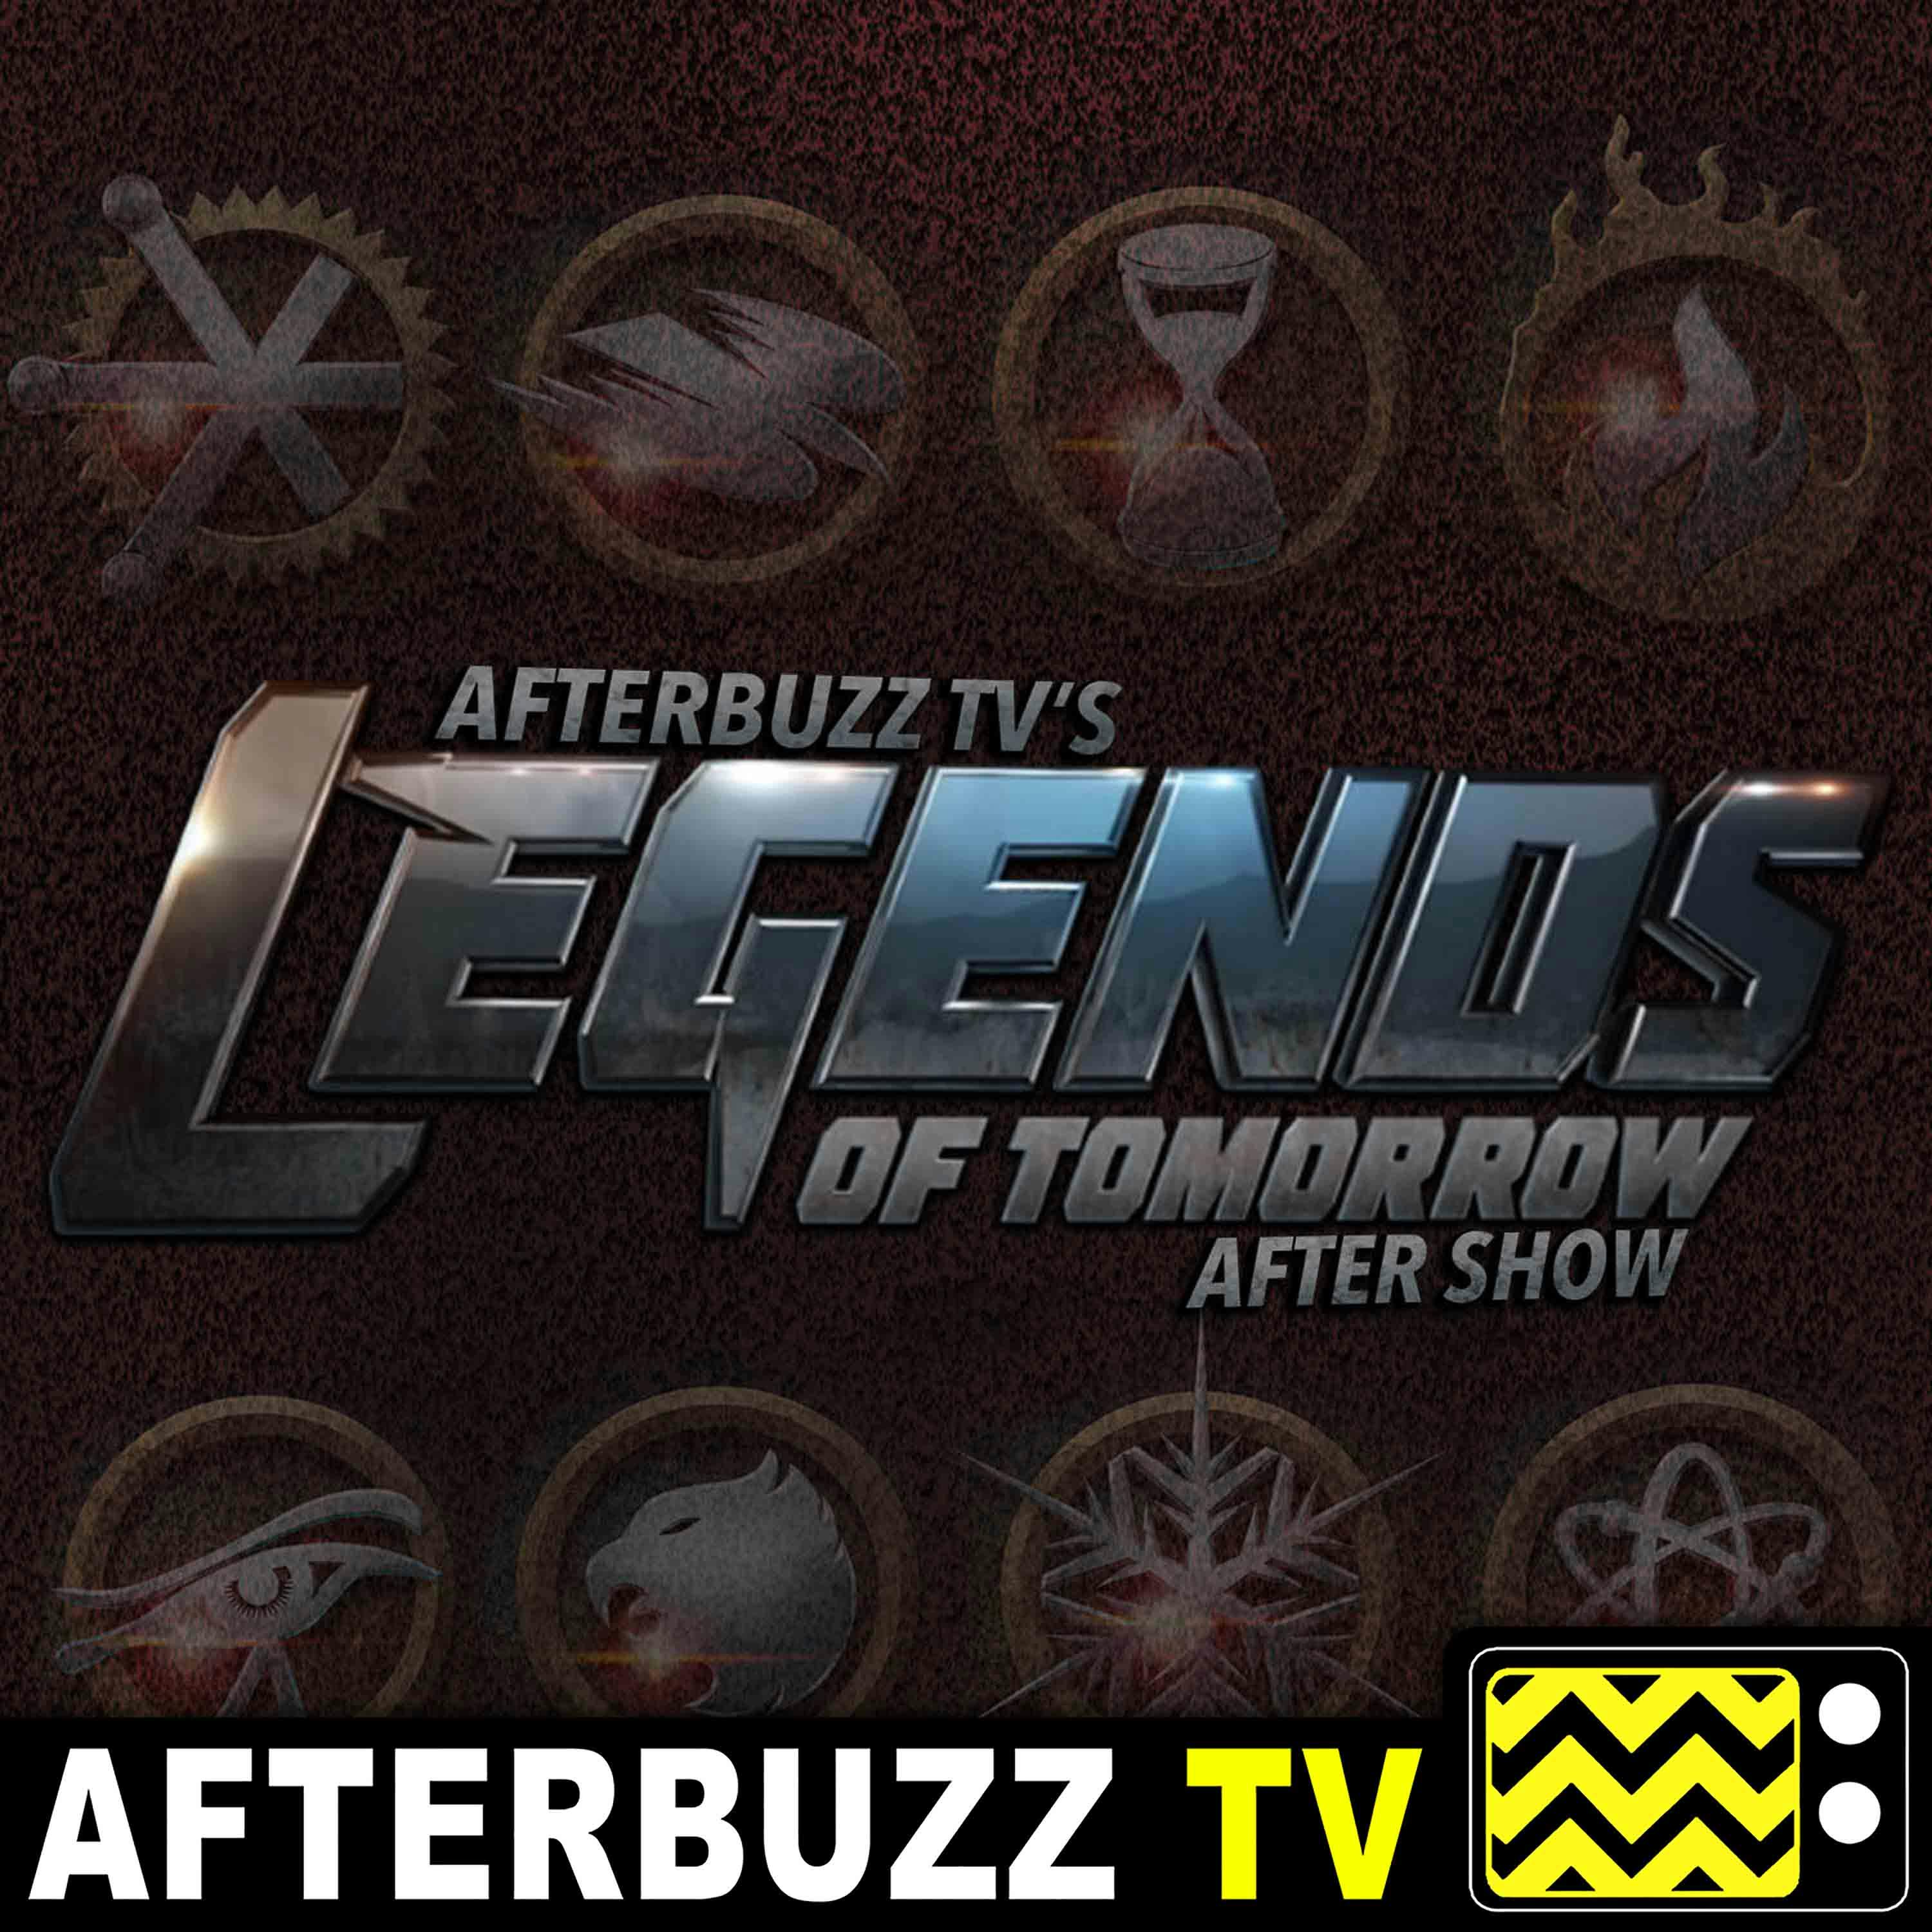 Legends Of Tomorrow S:3 | Welcome To The Jungle E:7 | AfterBuzz TV AfterShow